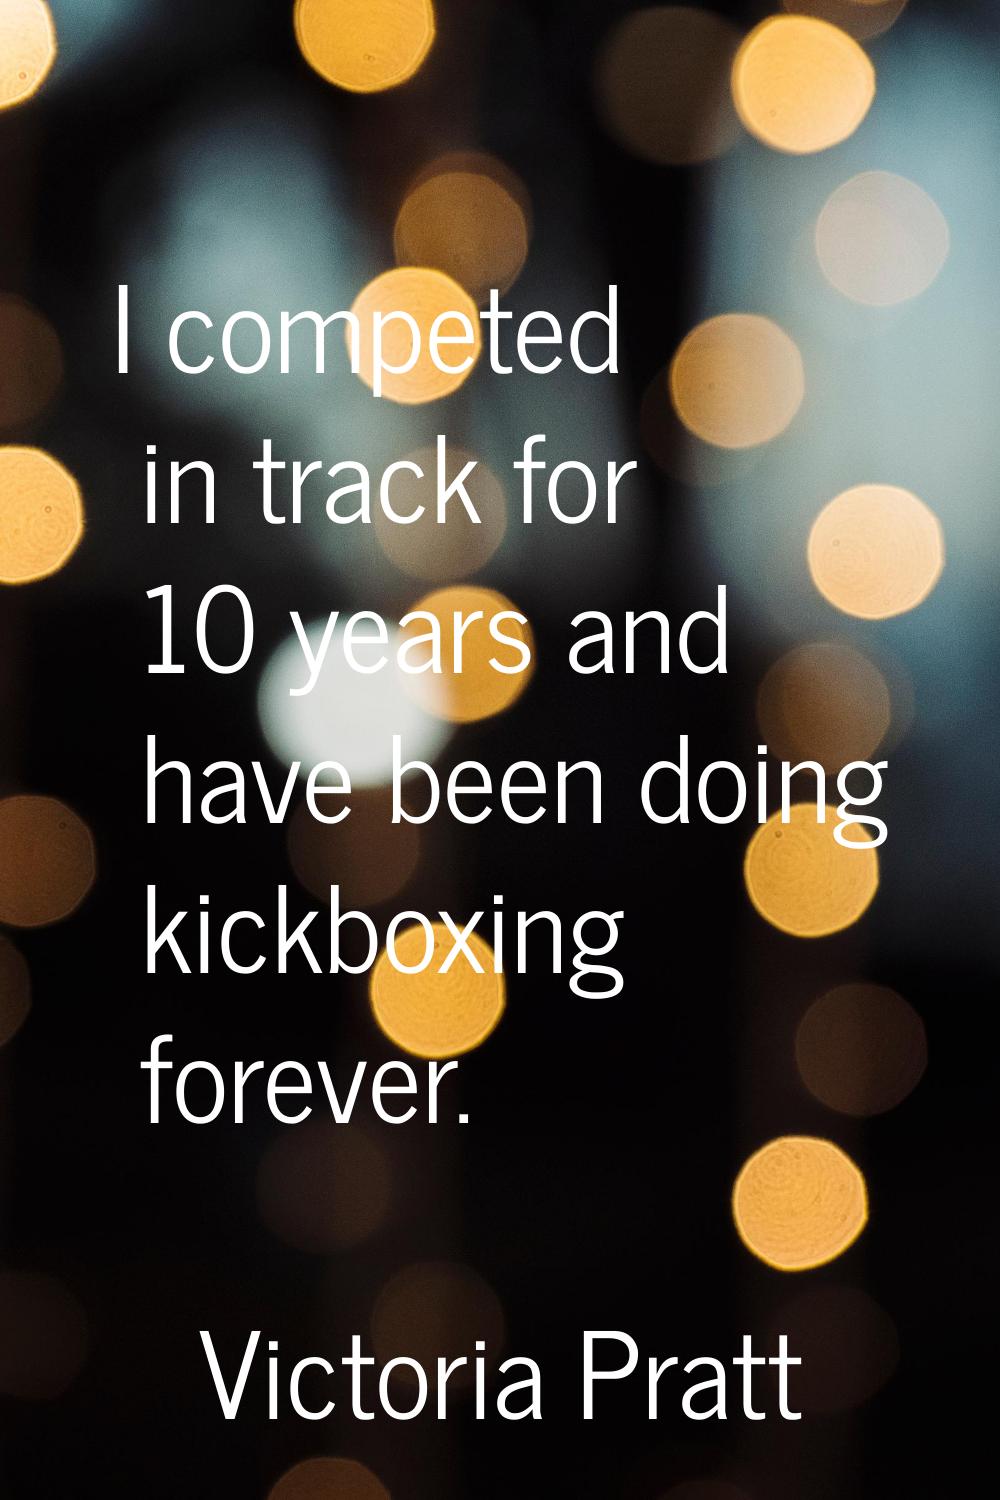 I competed in track for 10 years and have been doing kickboxing forever.